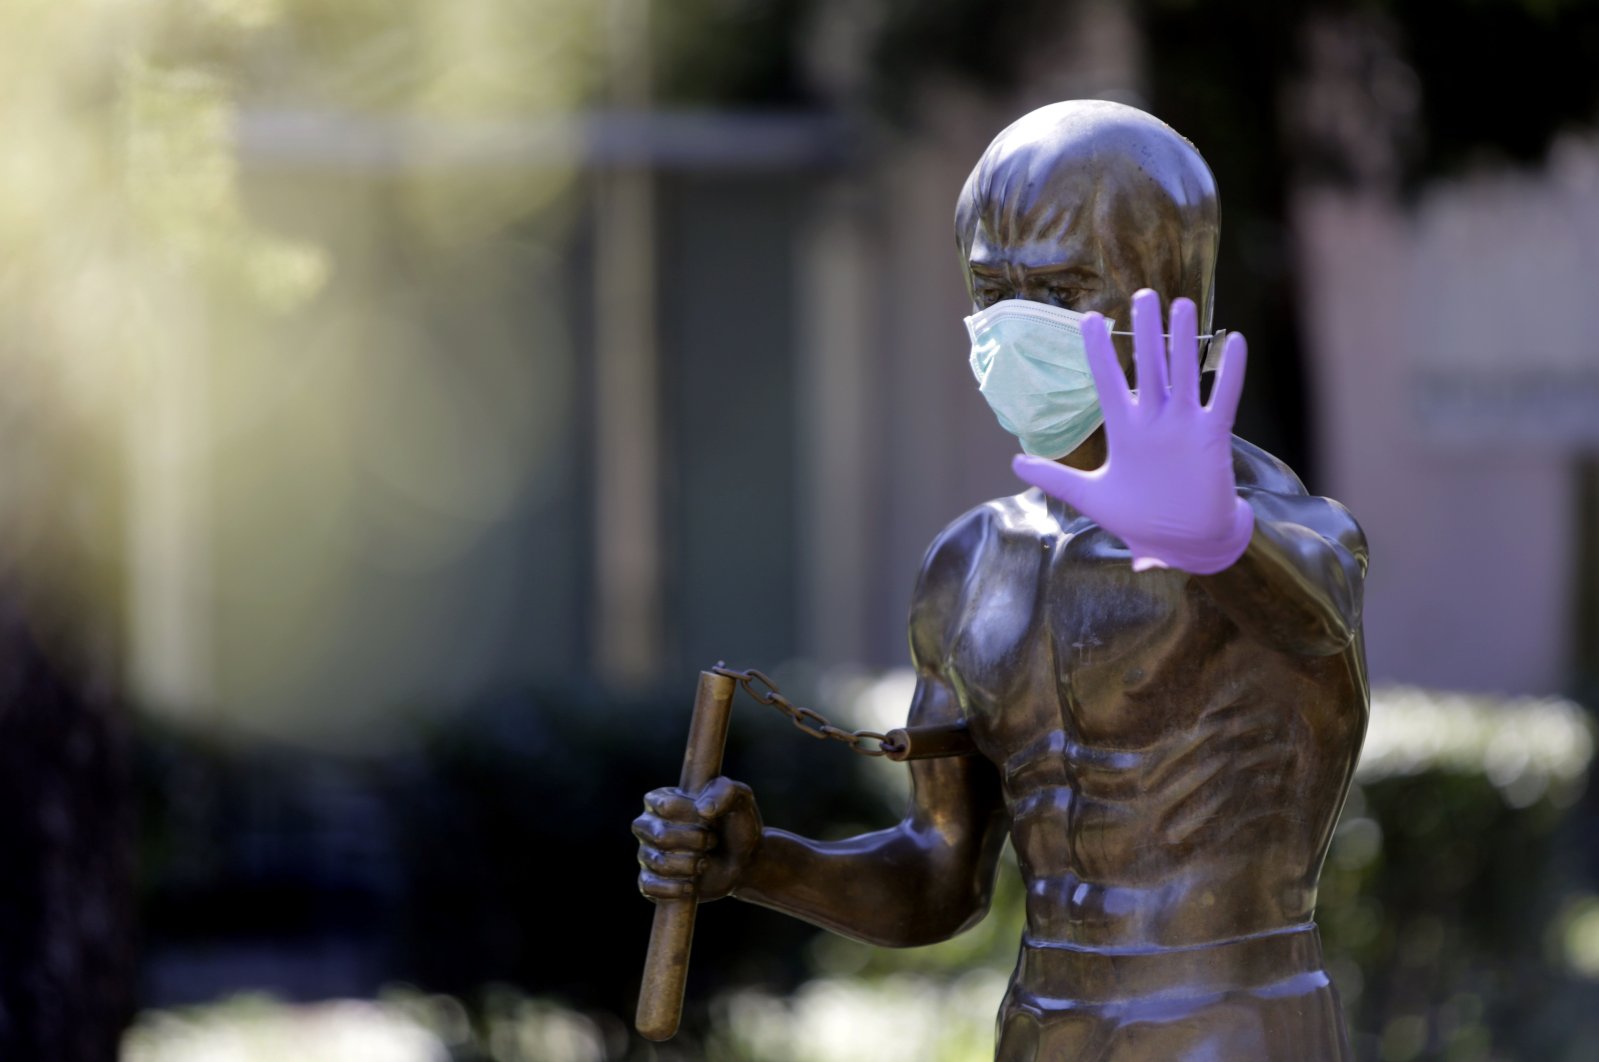 The statue dedicated to martial arts icon and actor Bruce Lee, wearing surgical gloves and a face mask, in the central park of Mostar, Bosnia-Herzegovina, April 2, 2020. (Photo by STR / AFP)